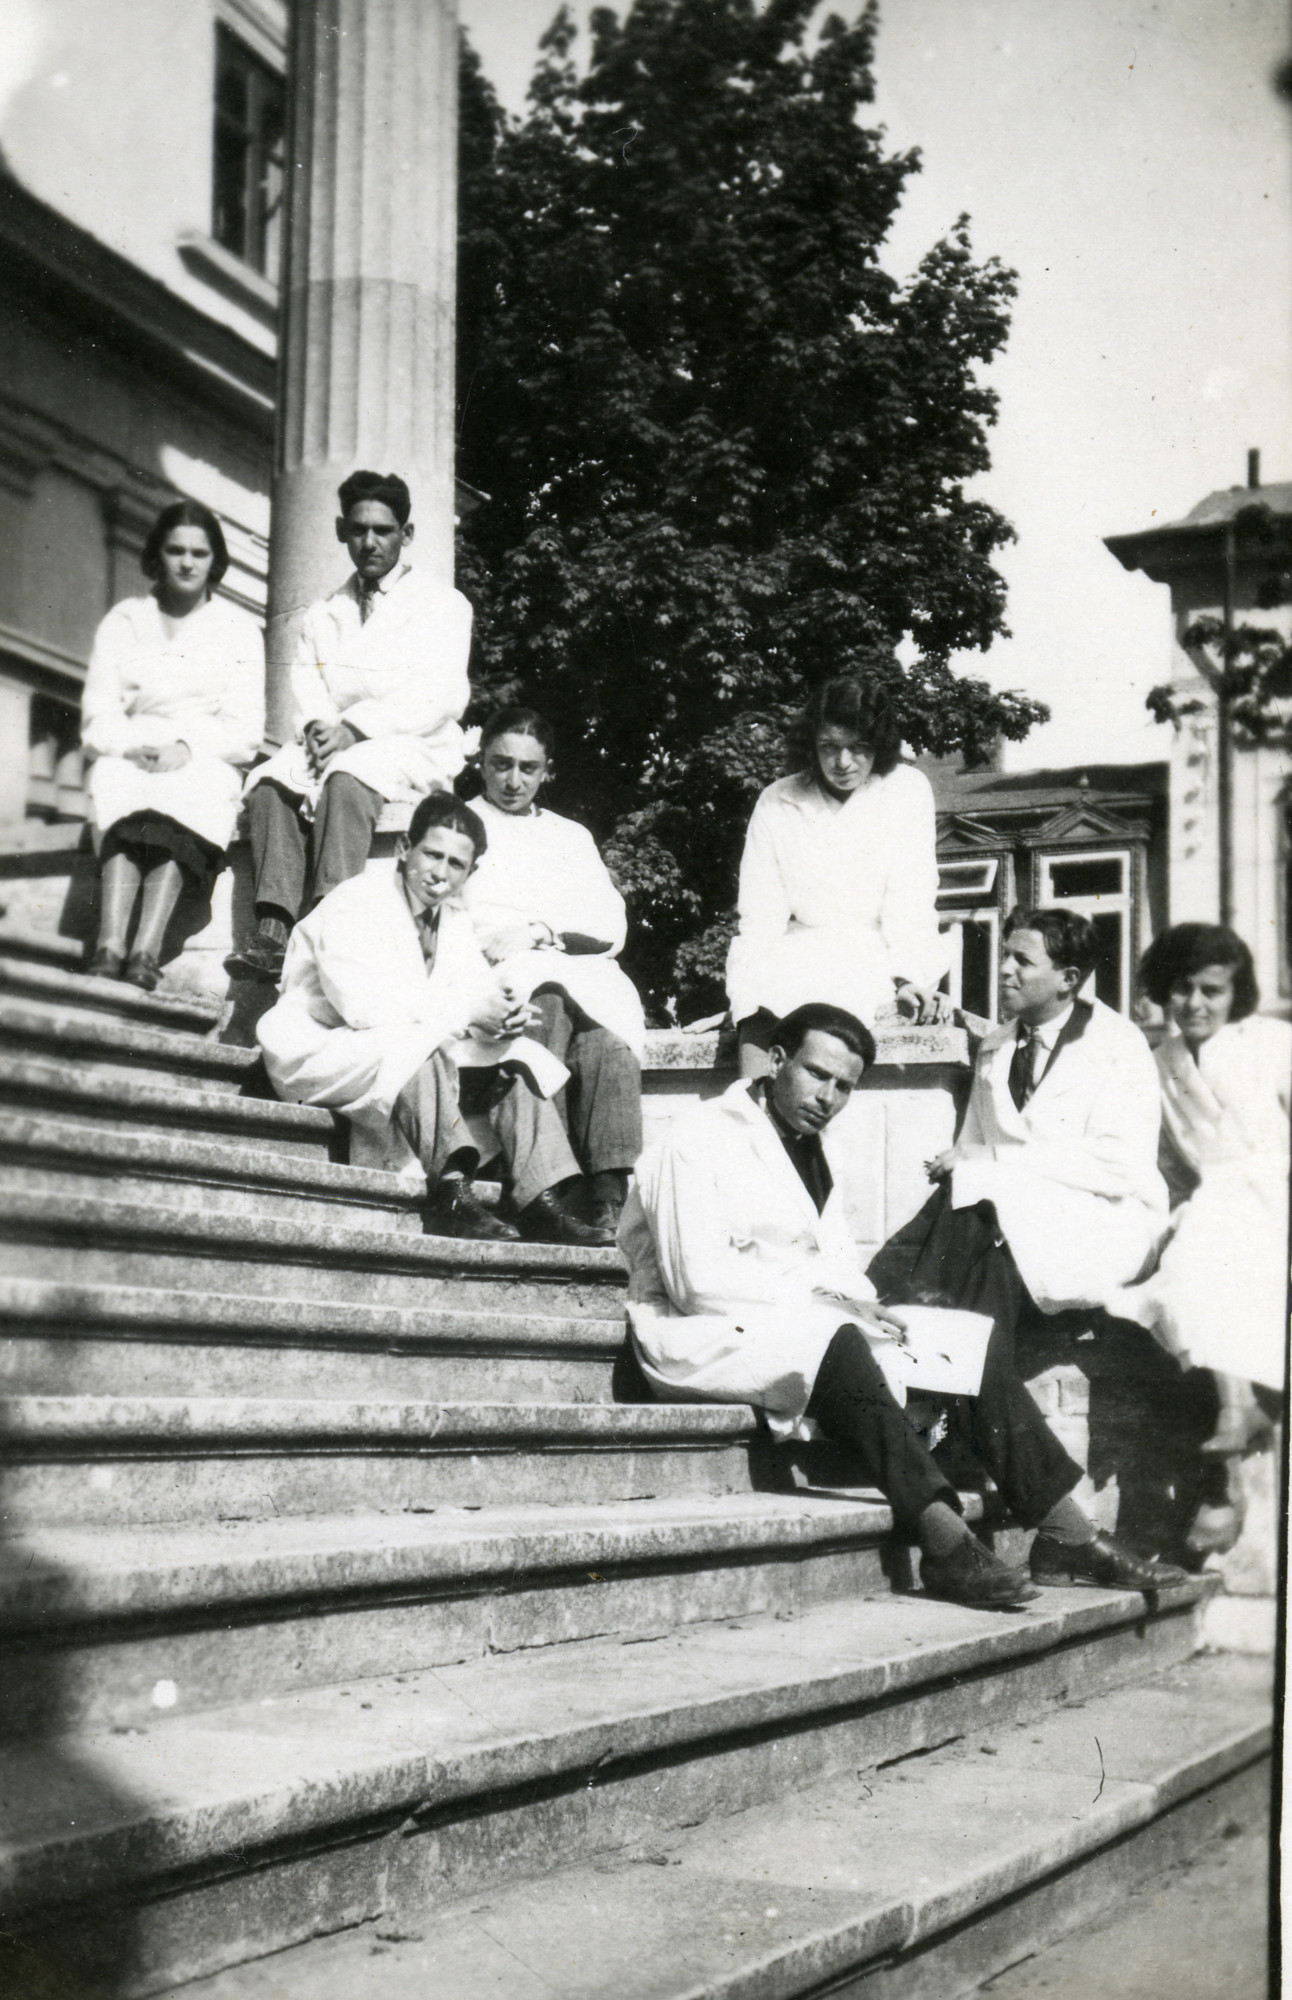 A Jewish Romanian woman poses on an outdoor stairwell with her medical school classmates. 

Among those pictured is Charlotte Josef (far left).